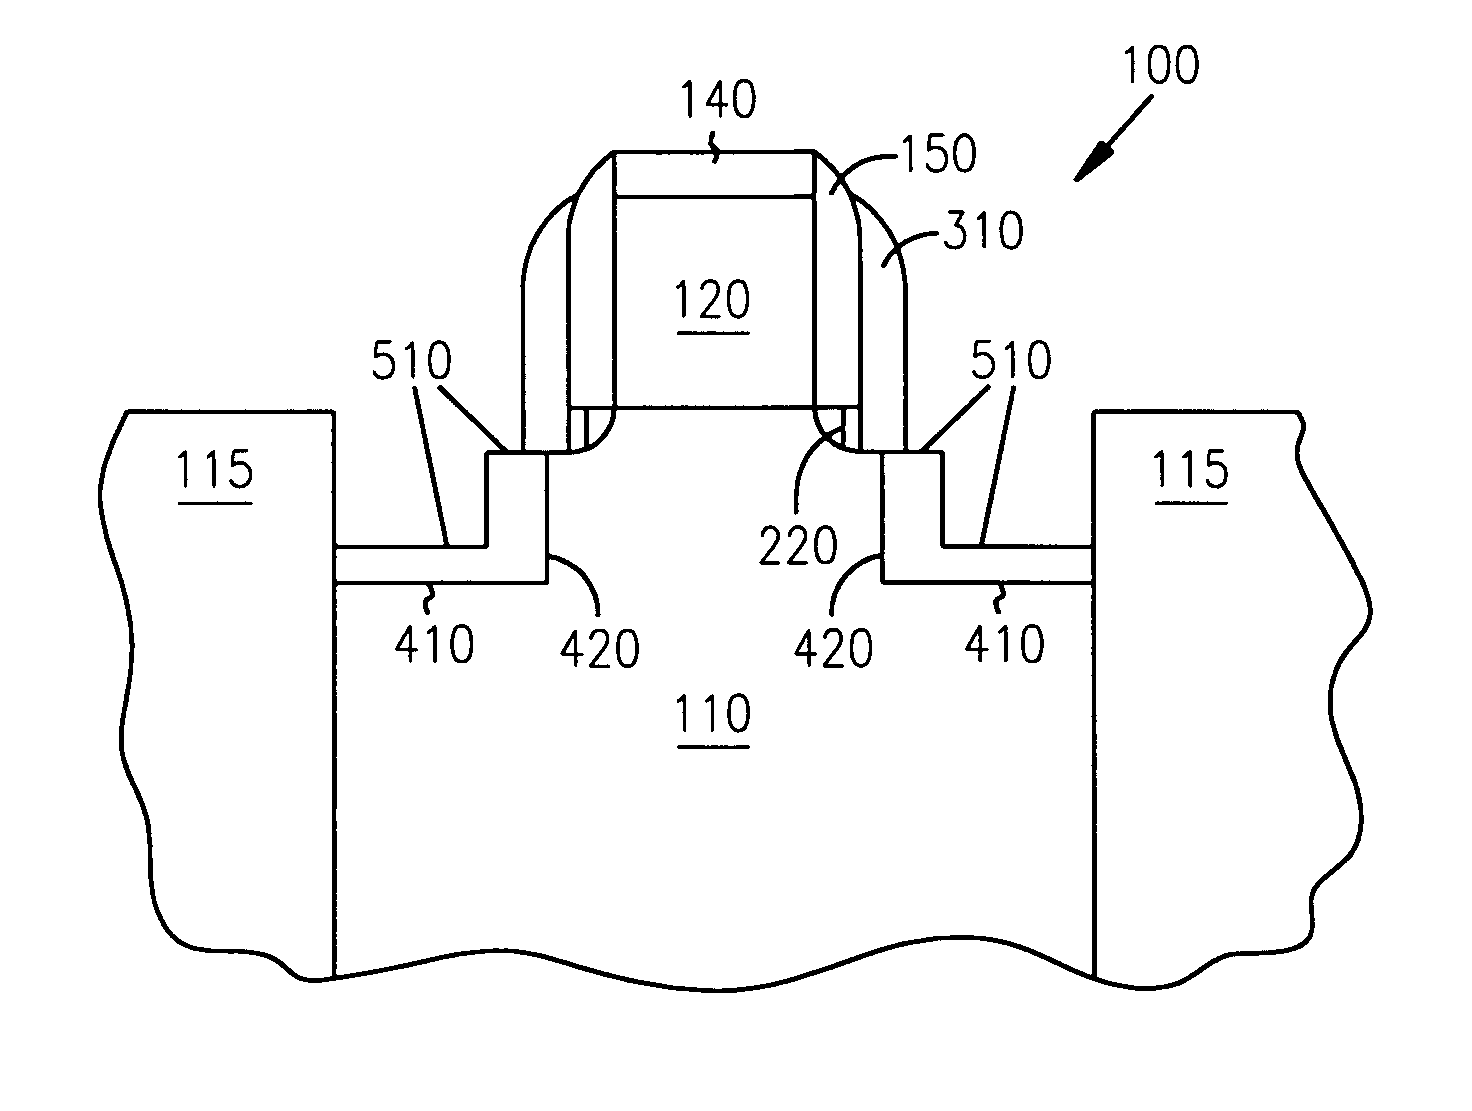 Methods of fabricating a dielectric plug in MOSFETs to suppress short-channel effects